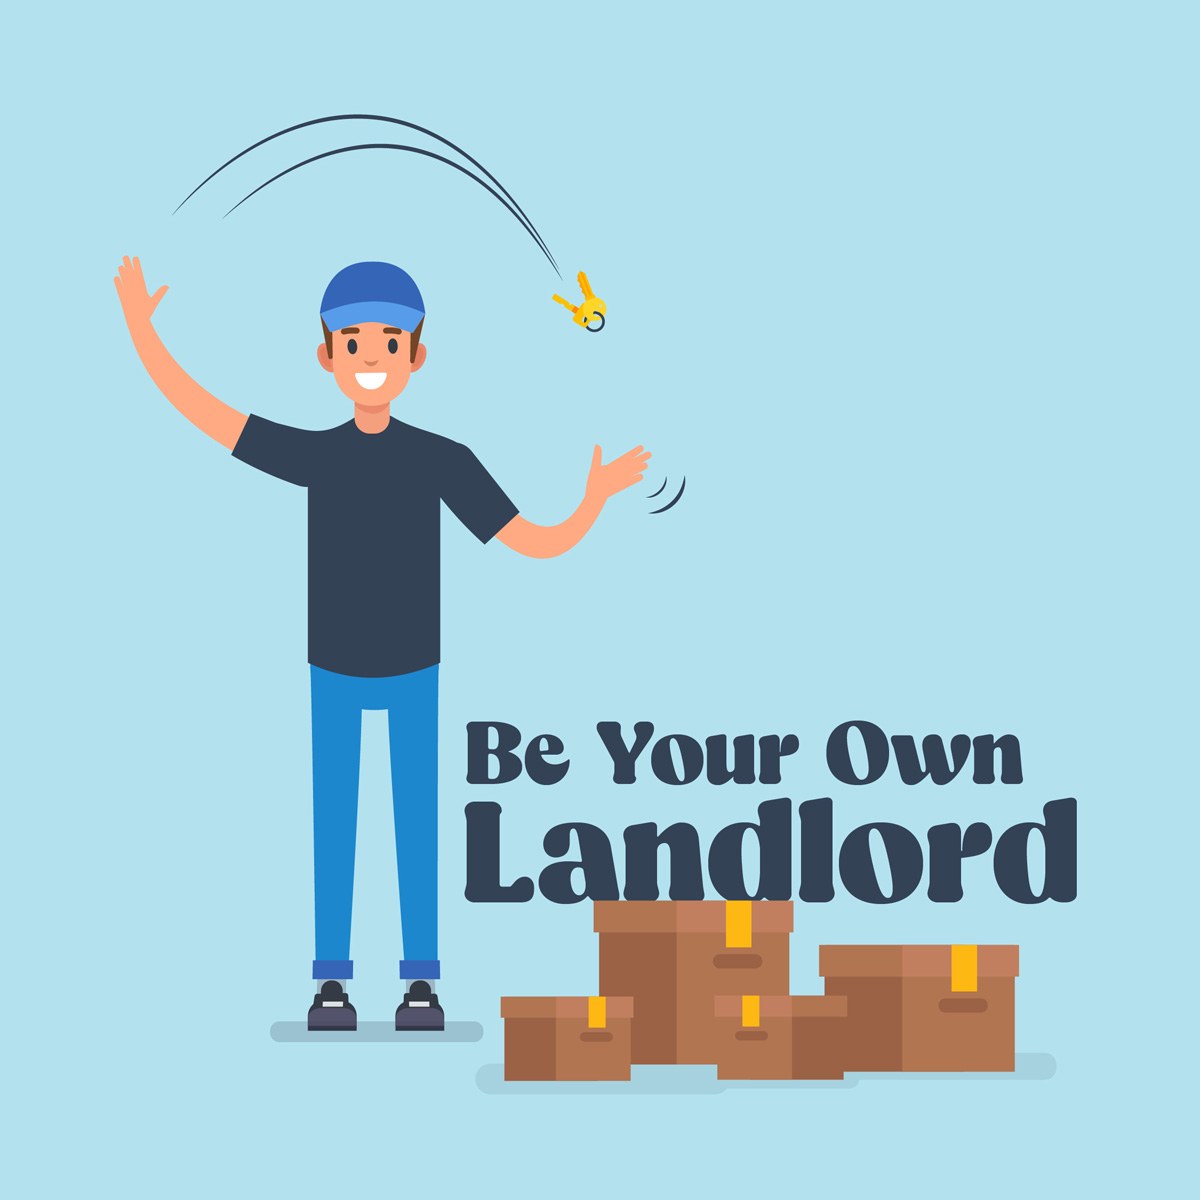 Why pay rent when you could be the landlord? Stop contributing to your landlord's mortgage and start building your own equity. Let's turn your rent receipts into house keys!